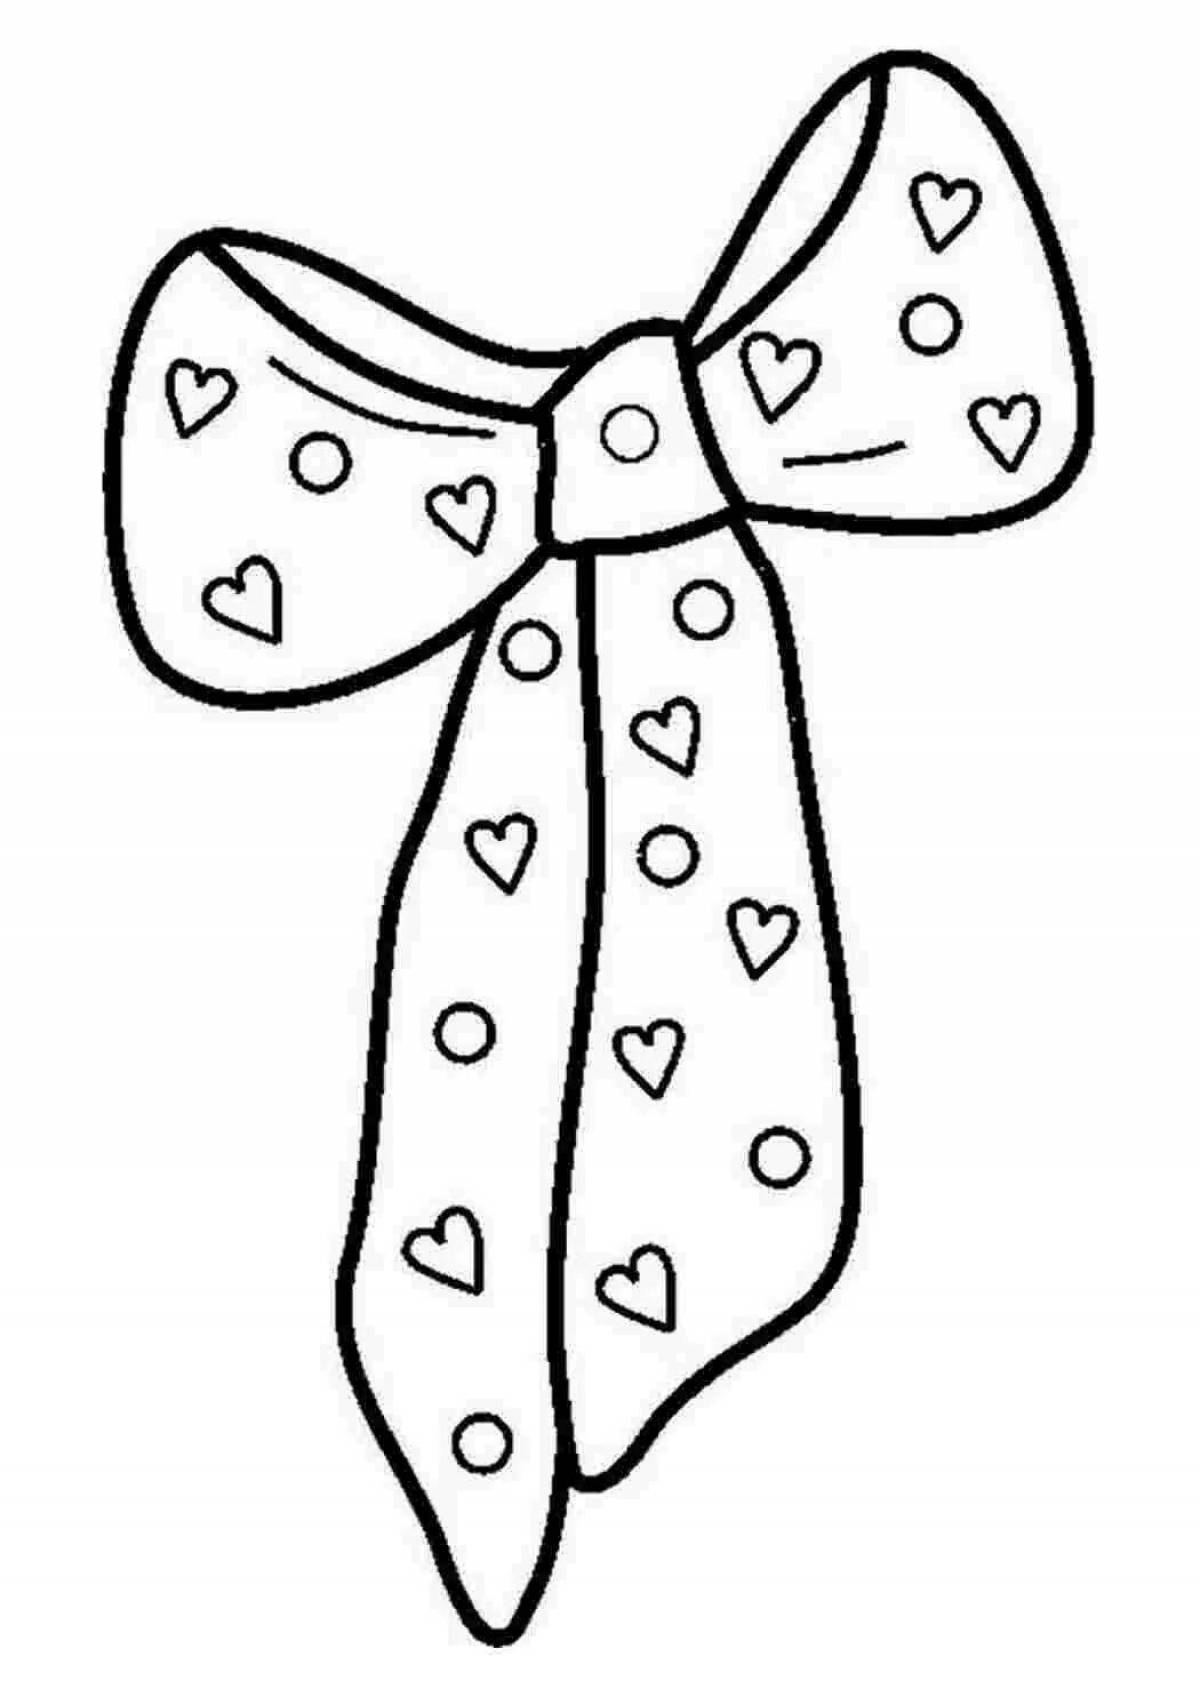 Amazing coloring pages with bows for kids